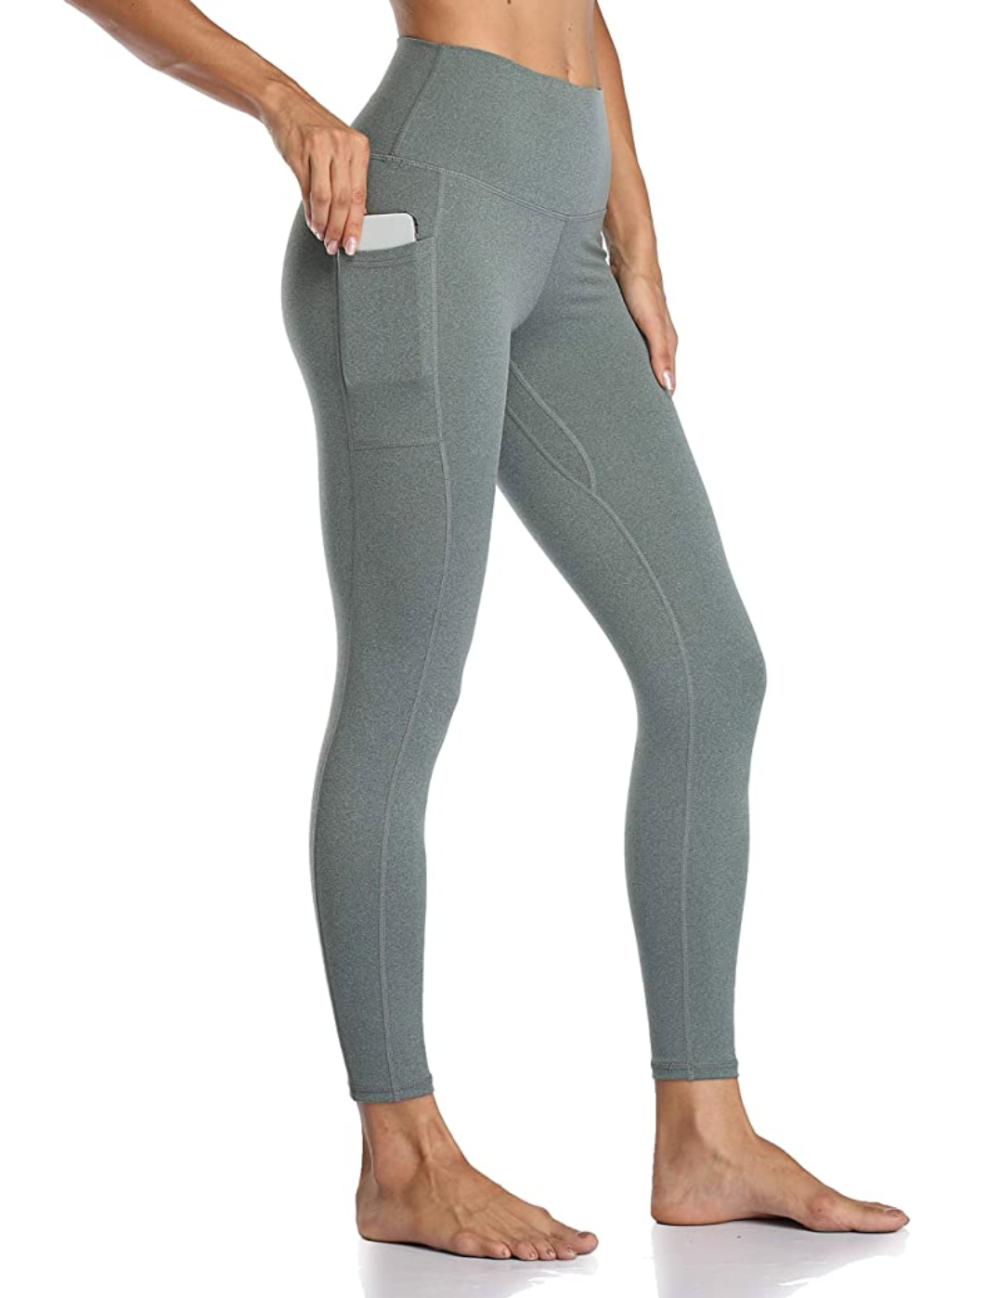 Shoppers Keep Comparing These $25 Leggings to Top